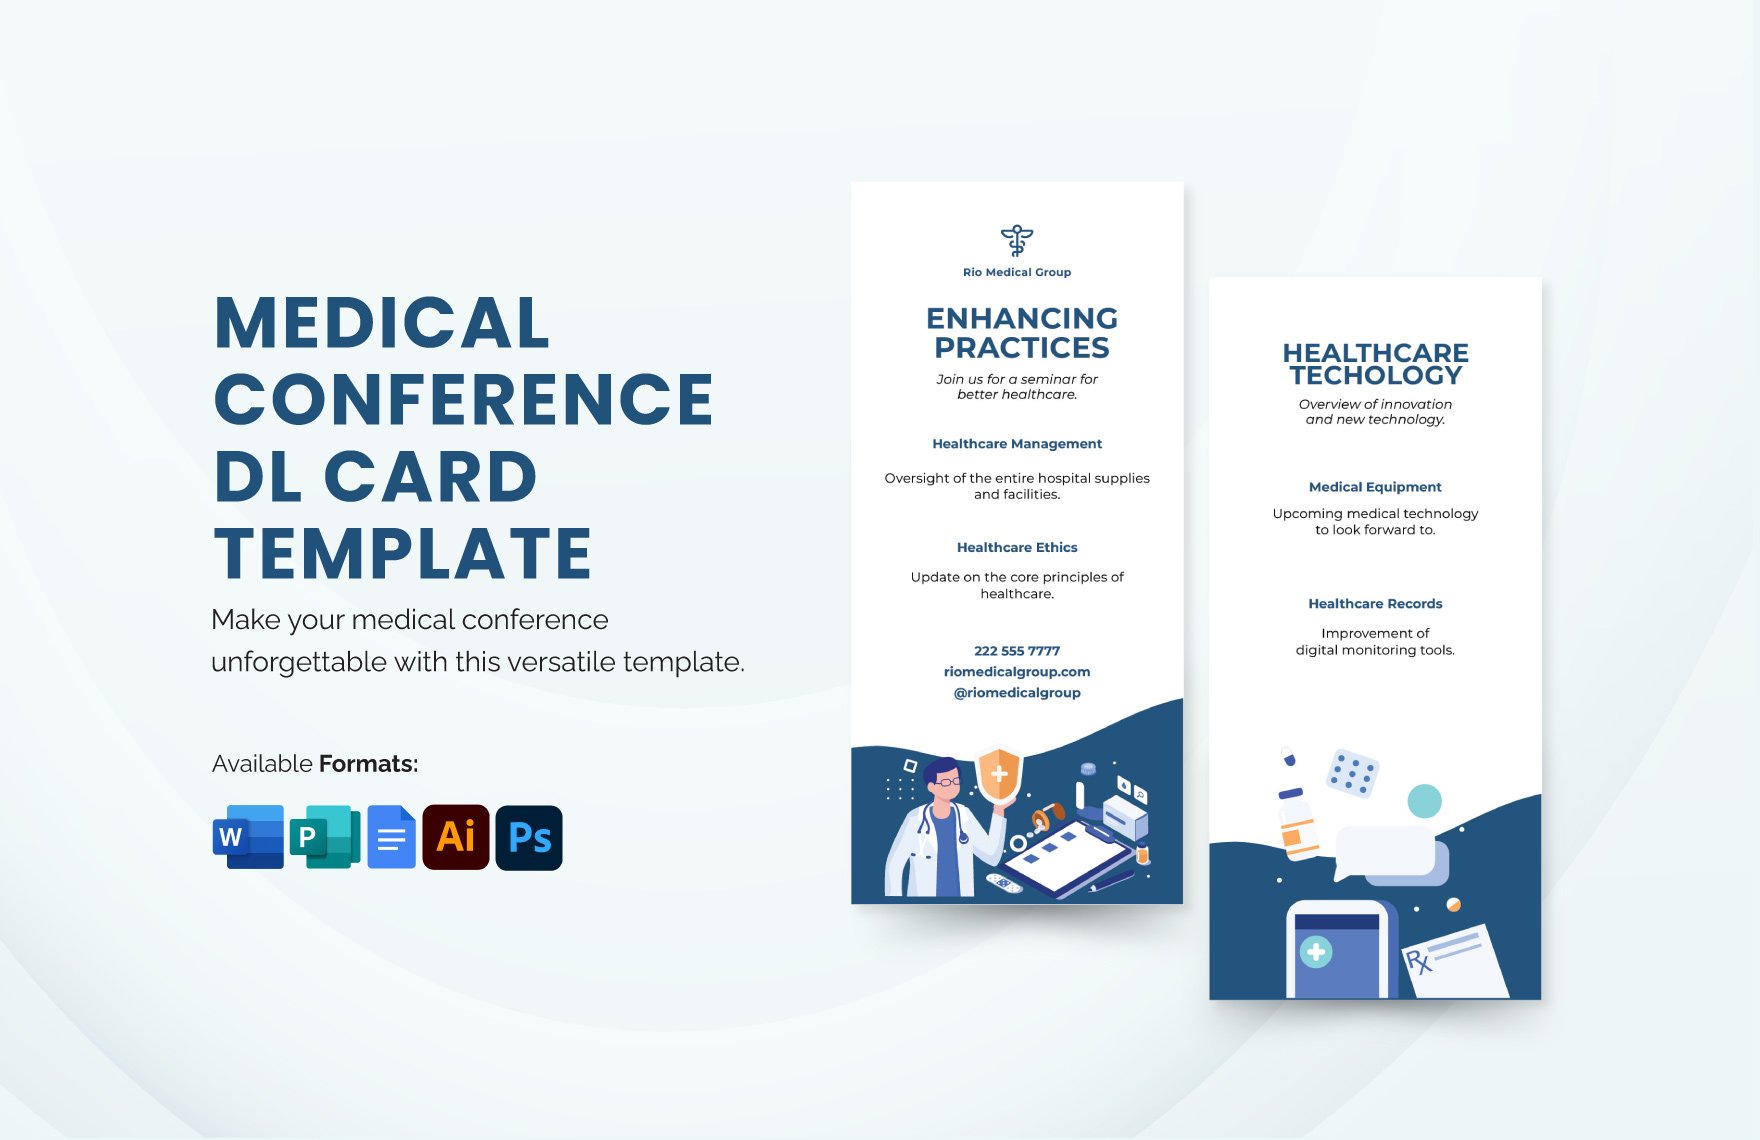 Medical Conference DL Card Template